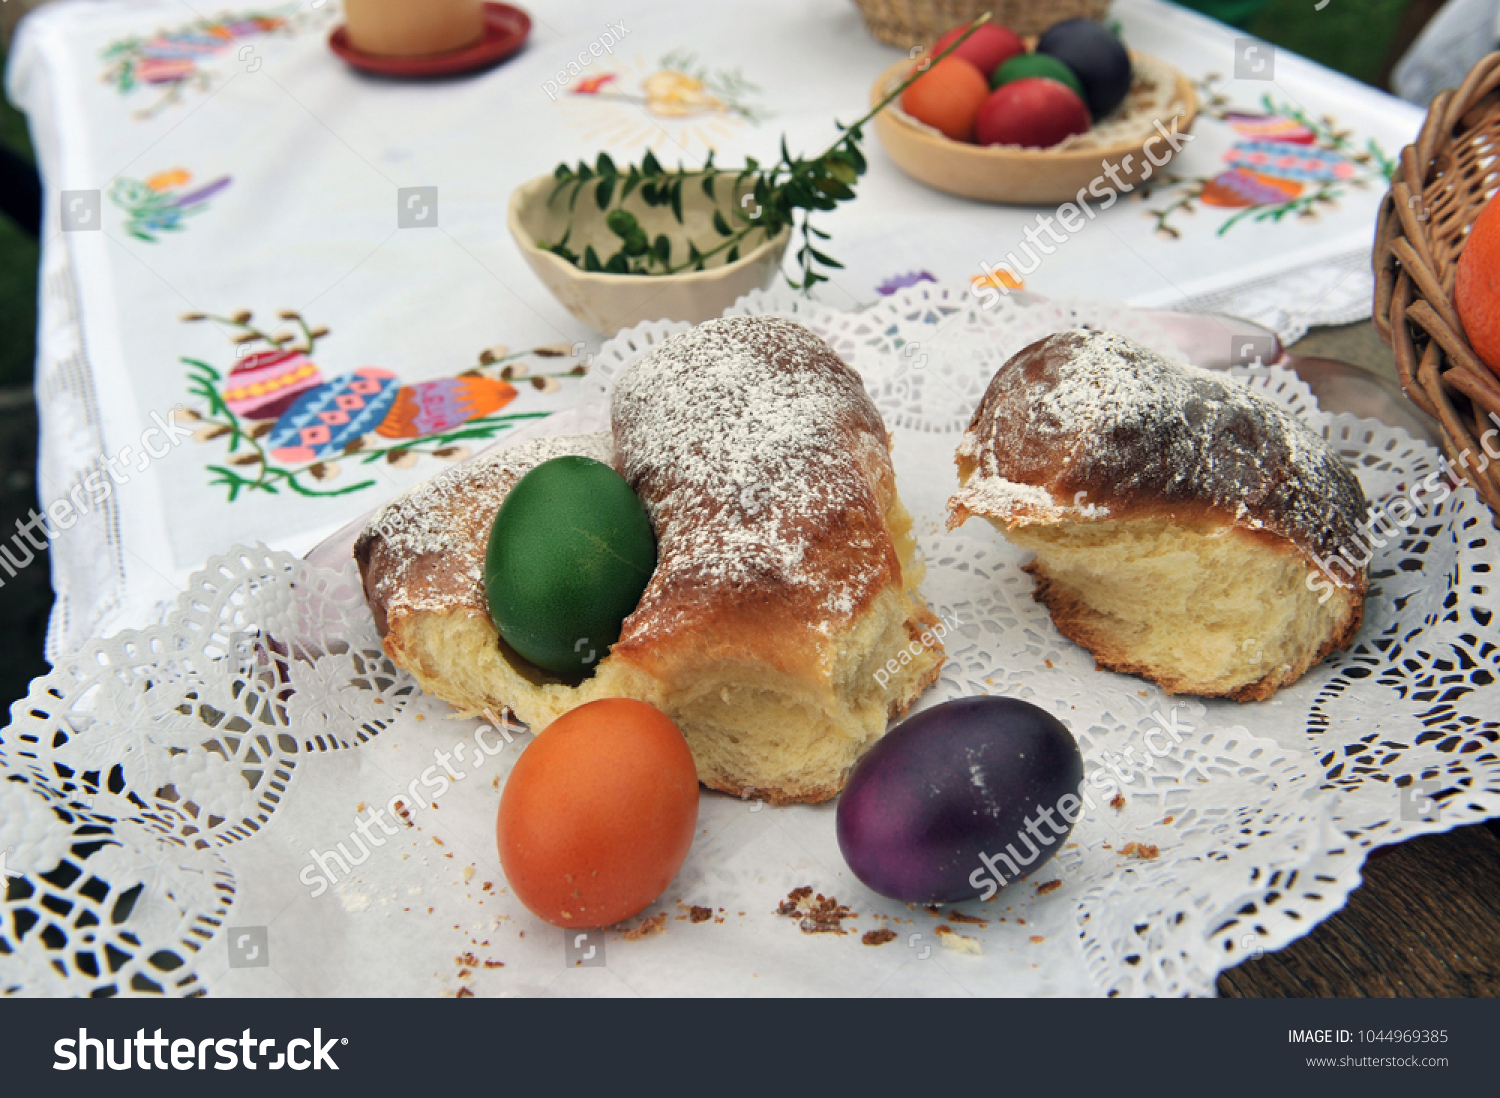 Easter traditions - colorful eggs placed in a traditional sweet bread. #1044969385